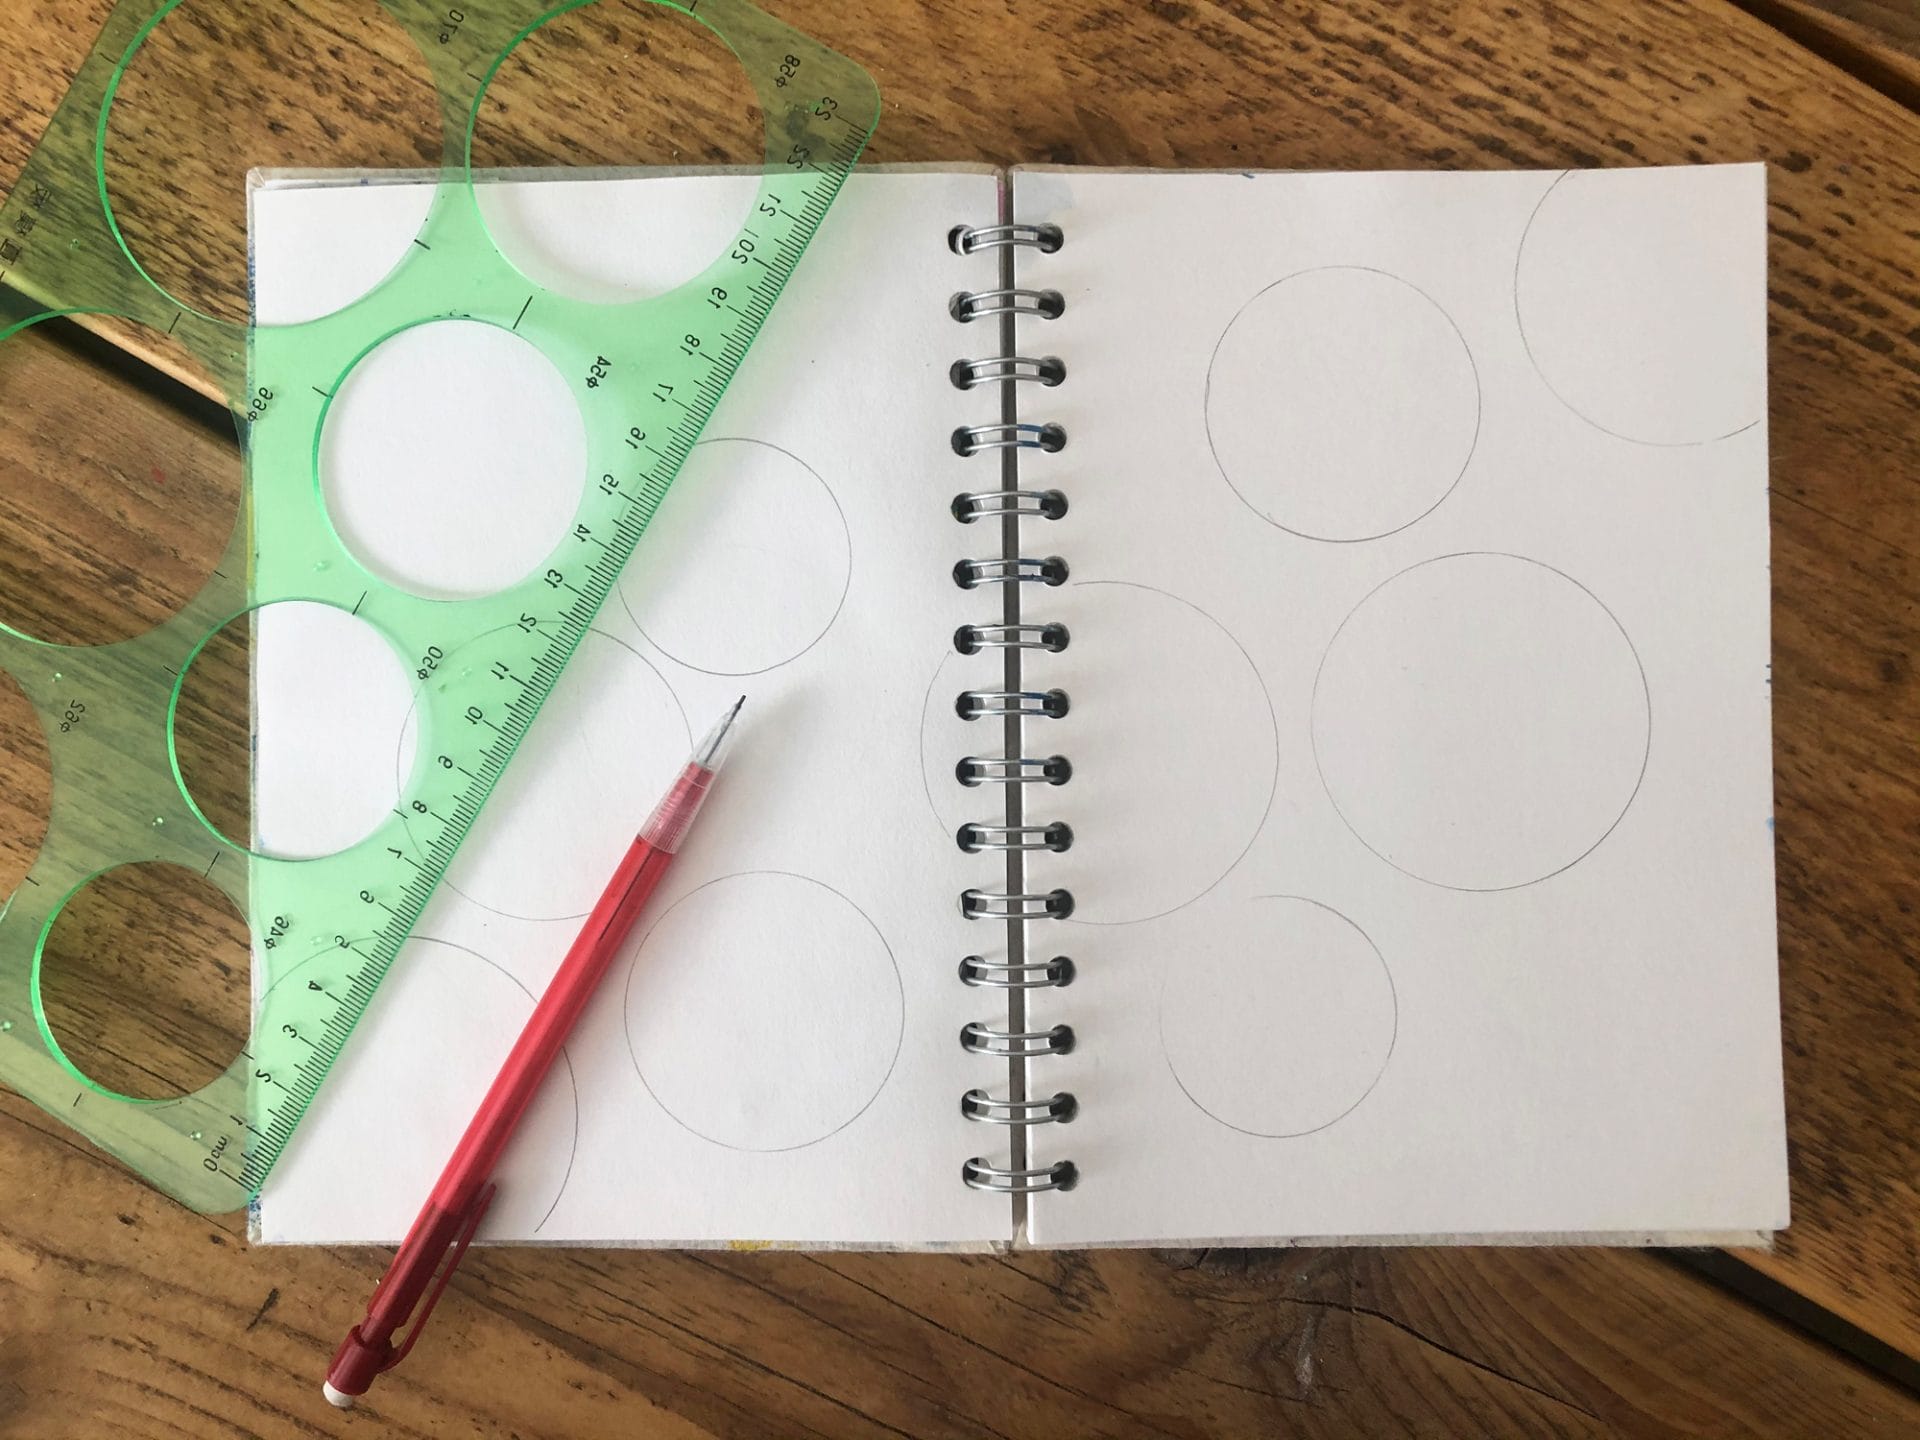 Sketchbook page with circles